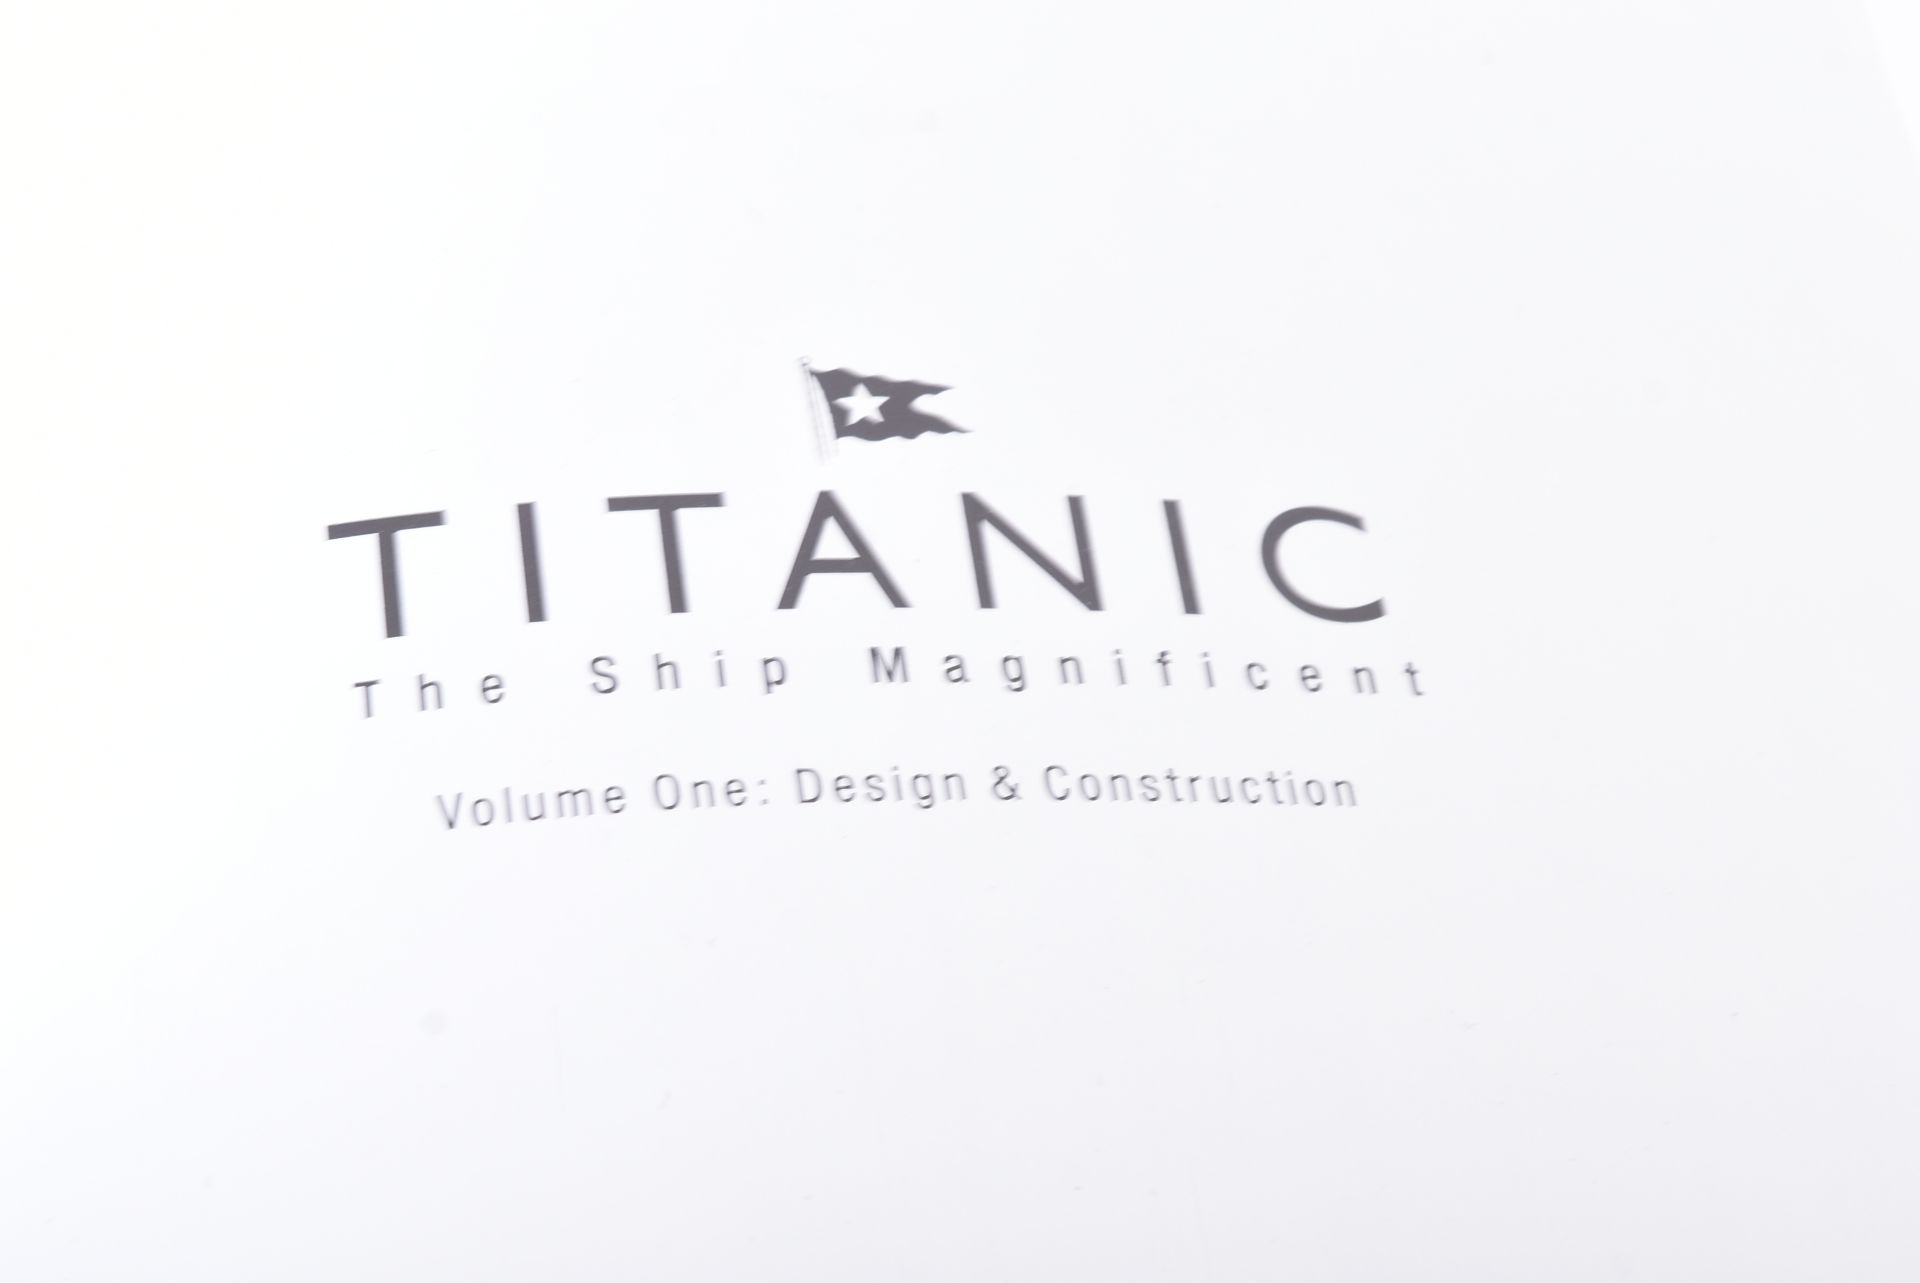 RMS TITANIC - THE SHIP MAGNIFICENT - THE HISTORY PRESS - Image 4 of 5